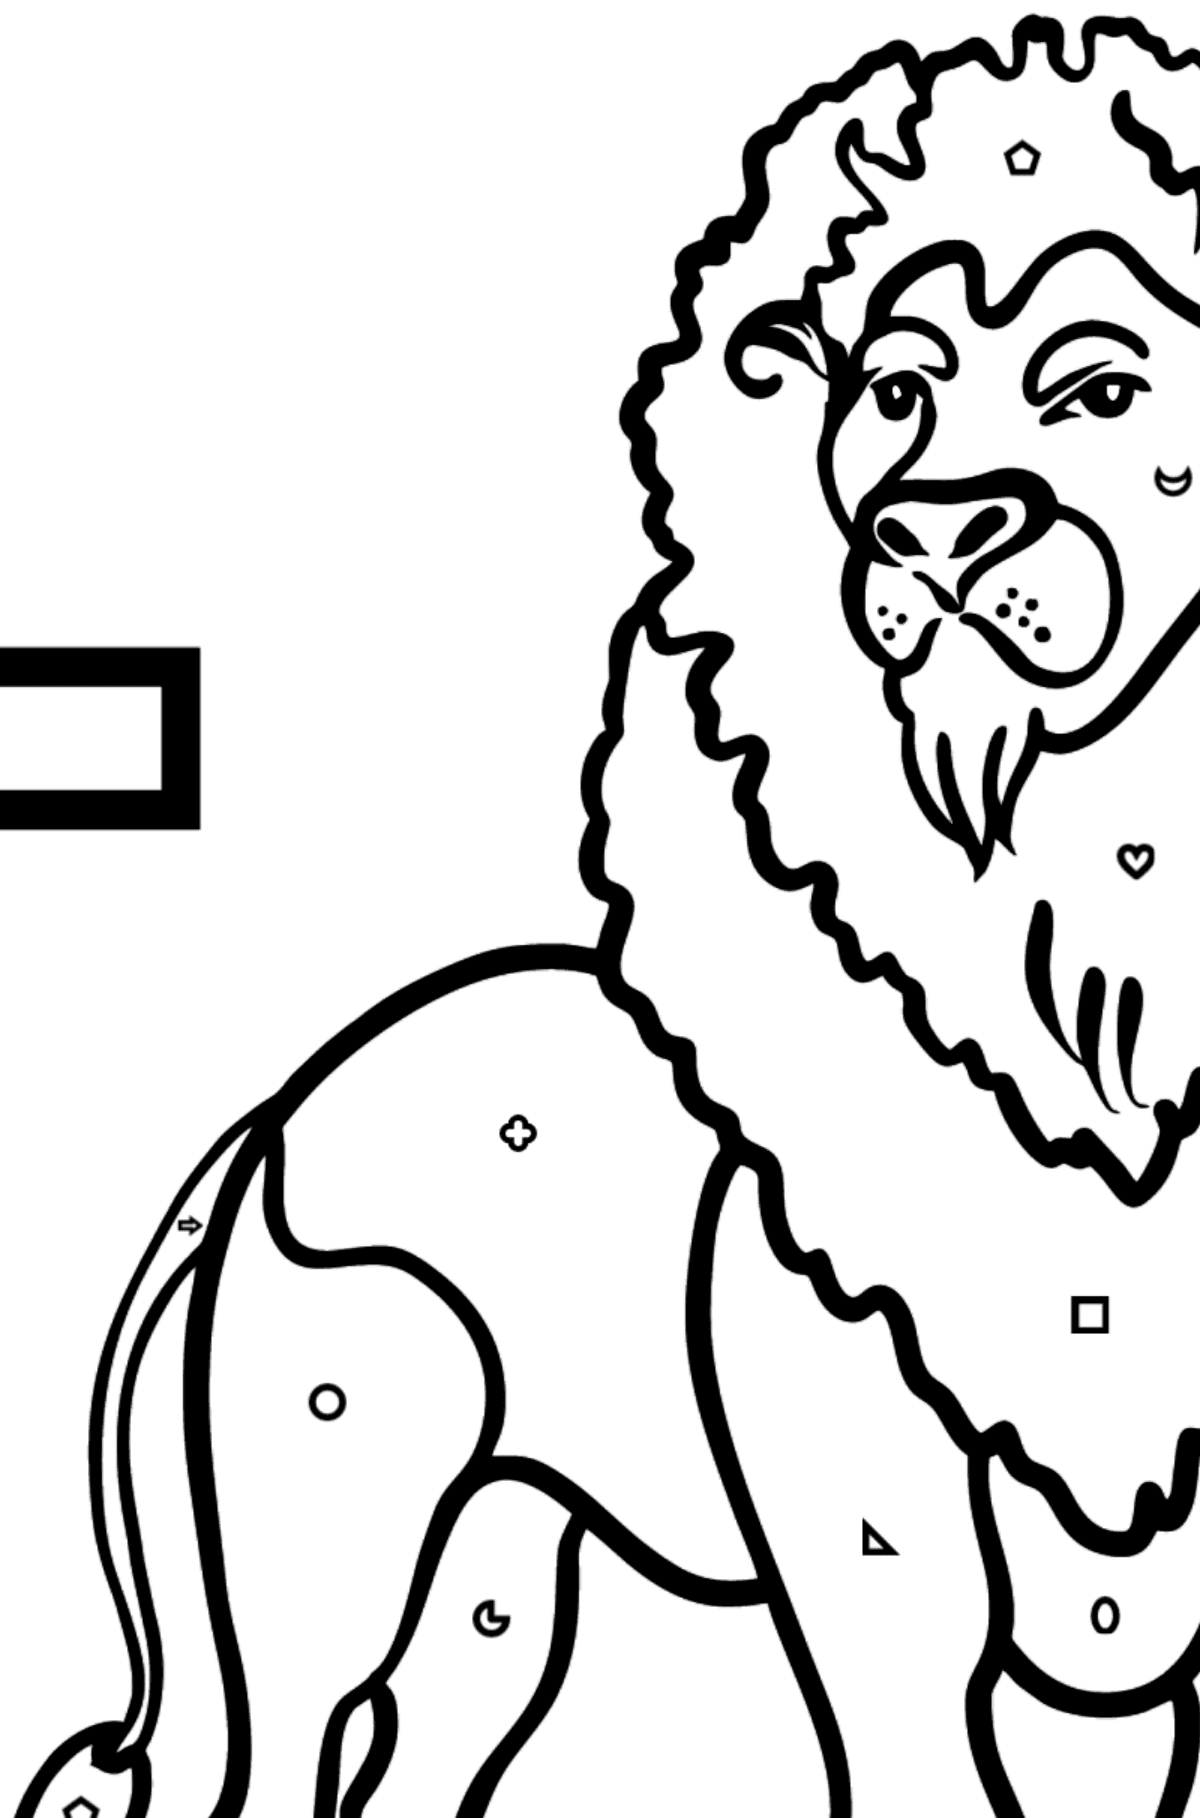 Spanish Letter L coloring pages - LEON - Coloring by Geometric Shapes for Kids